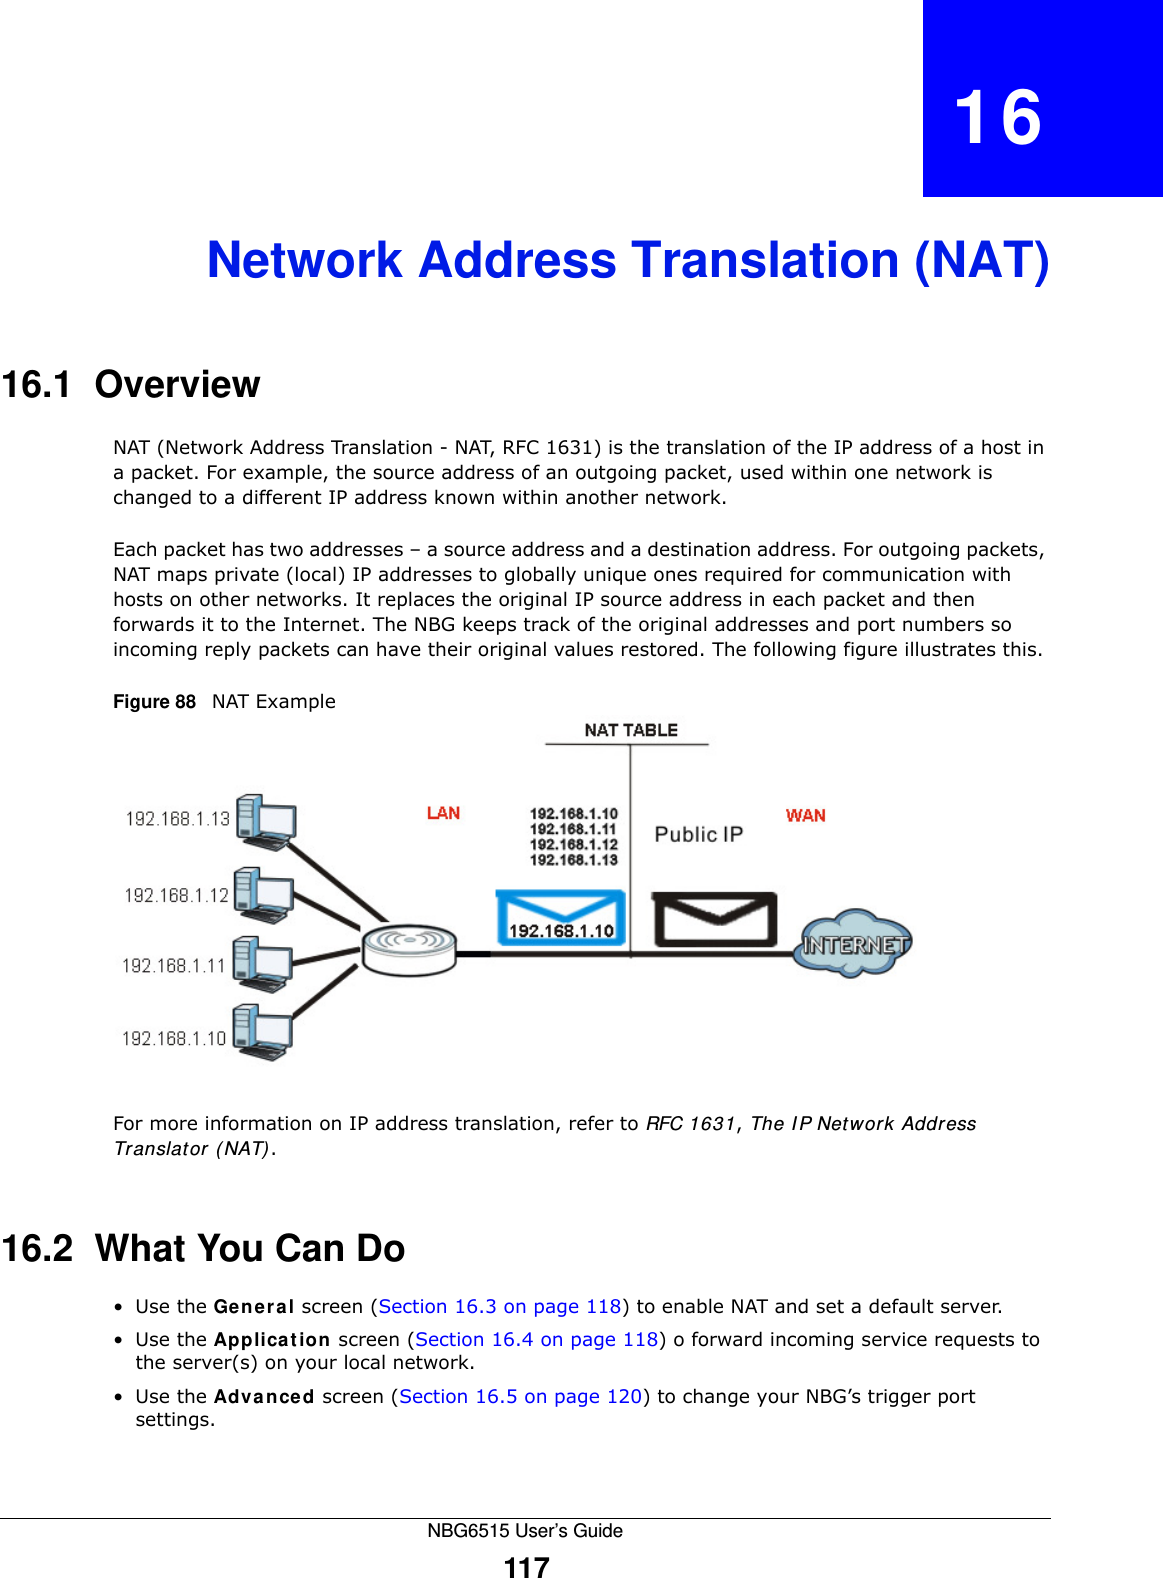 NBG6515 User’s Guide117CHAPTER   16Network Address Translation (NAT)16.1  Overview   NAT (Network Address Translation - NAT, RFC 1631) is the translation of the IP address of a host in a packet. For example, the source address of an outgoing packet, used within one network is changed to a different IP address known within another network.Each packet has two addresses – a source address and a destination address. For outgoing packets, NAT maps private (local) IP addresses to globally unique ones required for communication with hosts on other networks. It replaces the original IP source address in each packet and then forwards it to the Internet. The NBG keeps track of the original addresses and port numbers so incoming reply packets can have their original values restored. The following figure illustrates this.Figure 88   NAT ExampleFor more information on IP address translation, refer to RFC 1631, The IP Network Address Translator (NAT).16.2  What You Can Do•Use the General screen (Section 16.3 on page 118) to enable NAT and set a default server.•Use the Application screen (Section 16.4 on page 118) o forward incoming service requests to the server(s) on your local network.•Use the Advanced screen (Section 16.5 on page 120) to change your NBG’s trigger port settings.